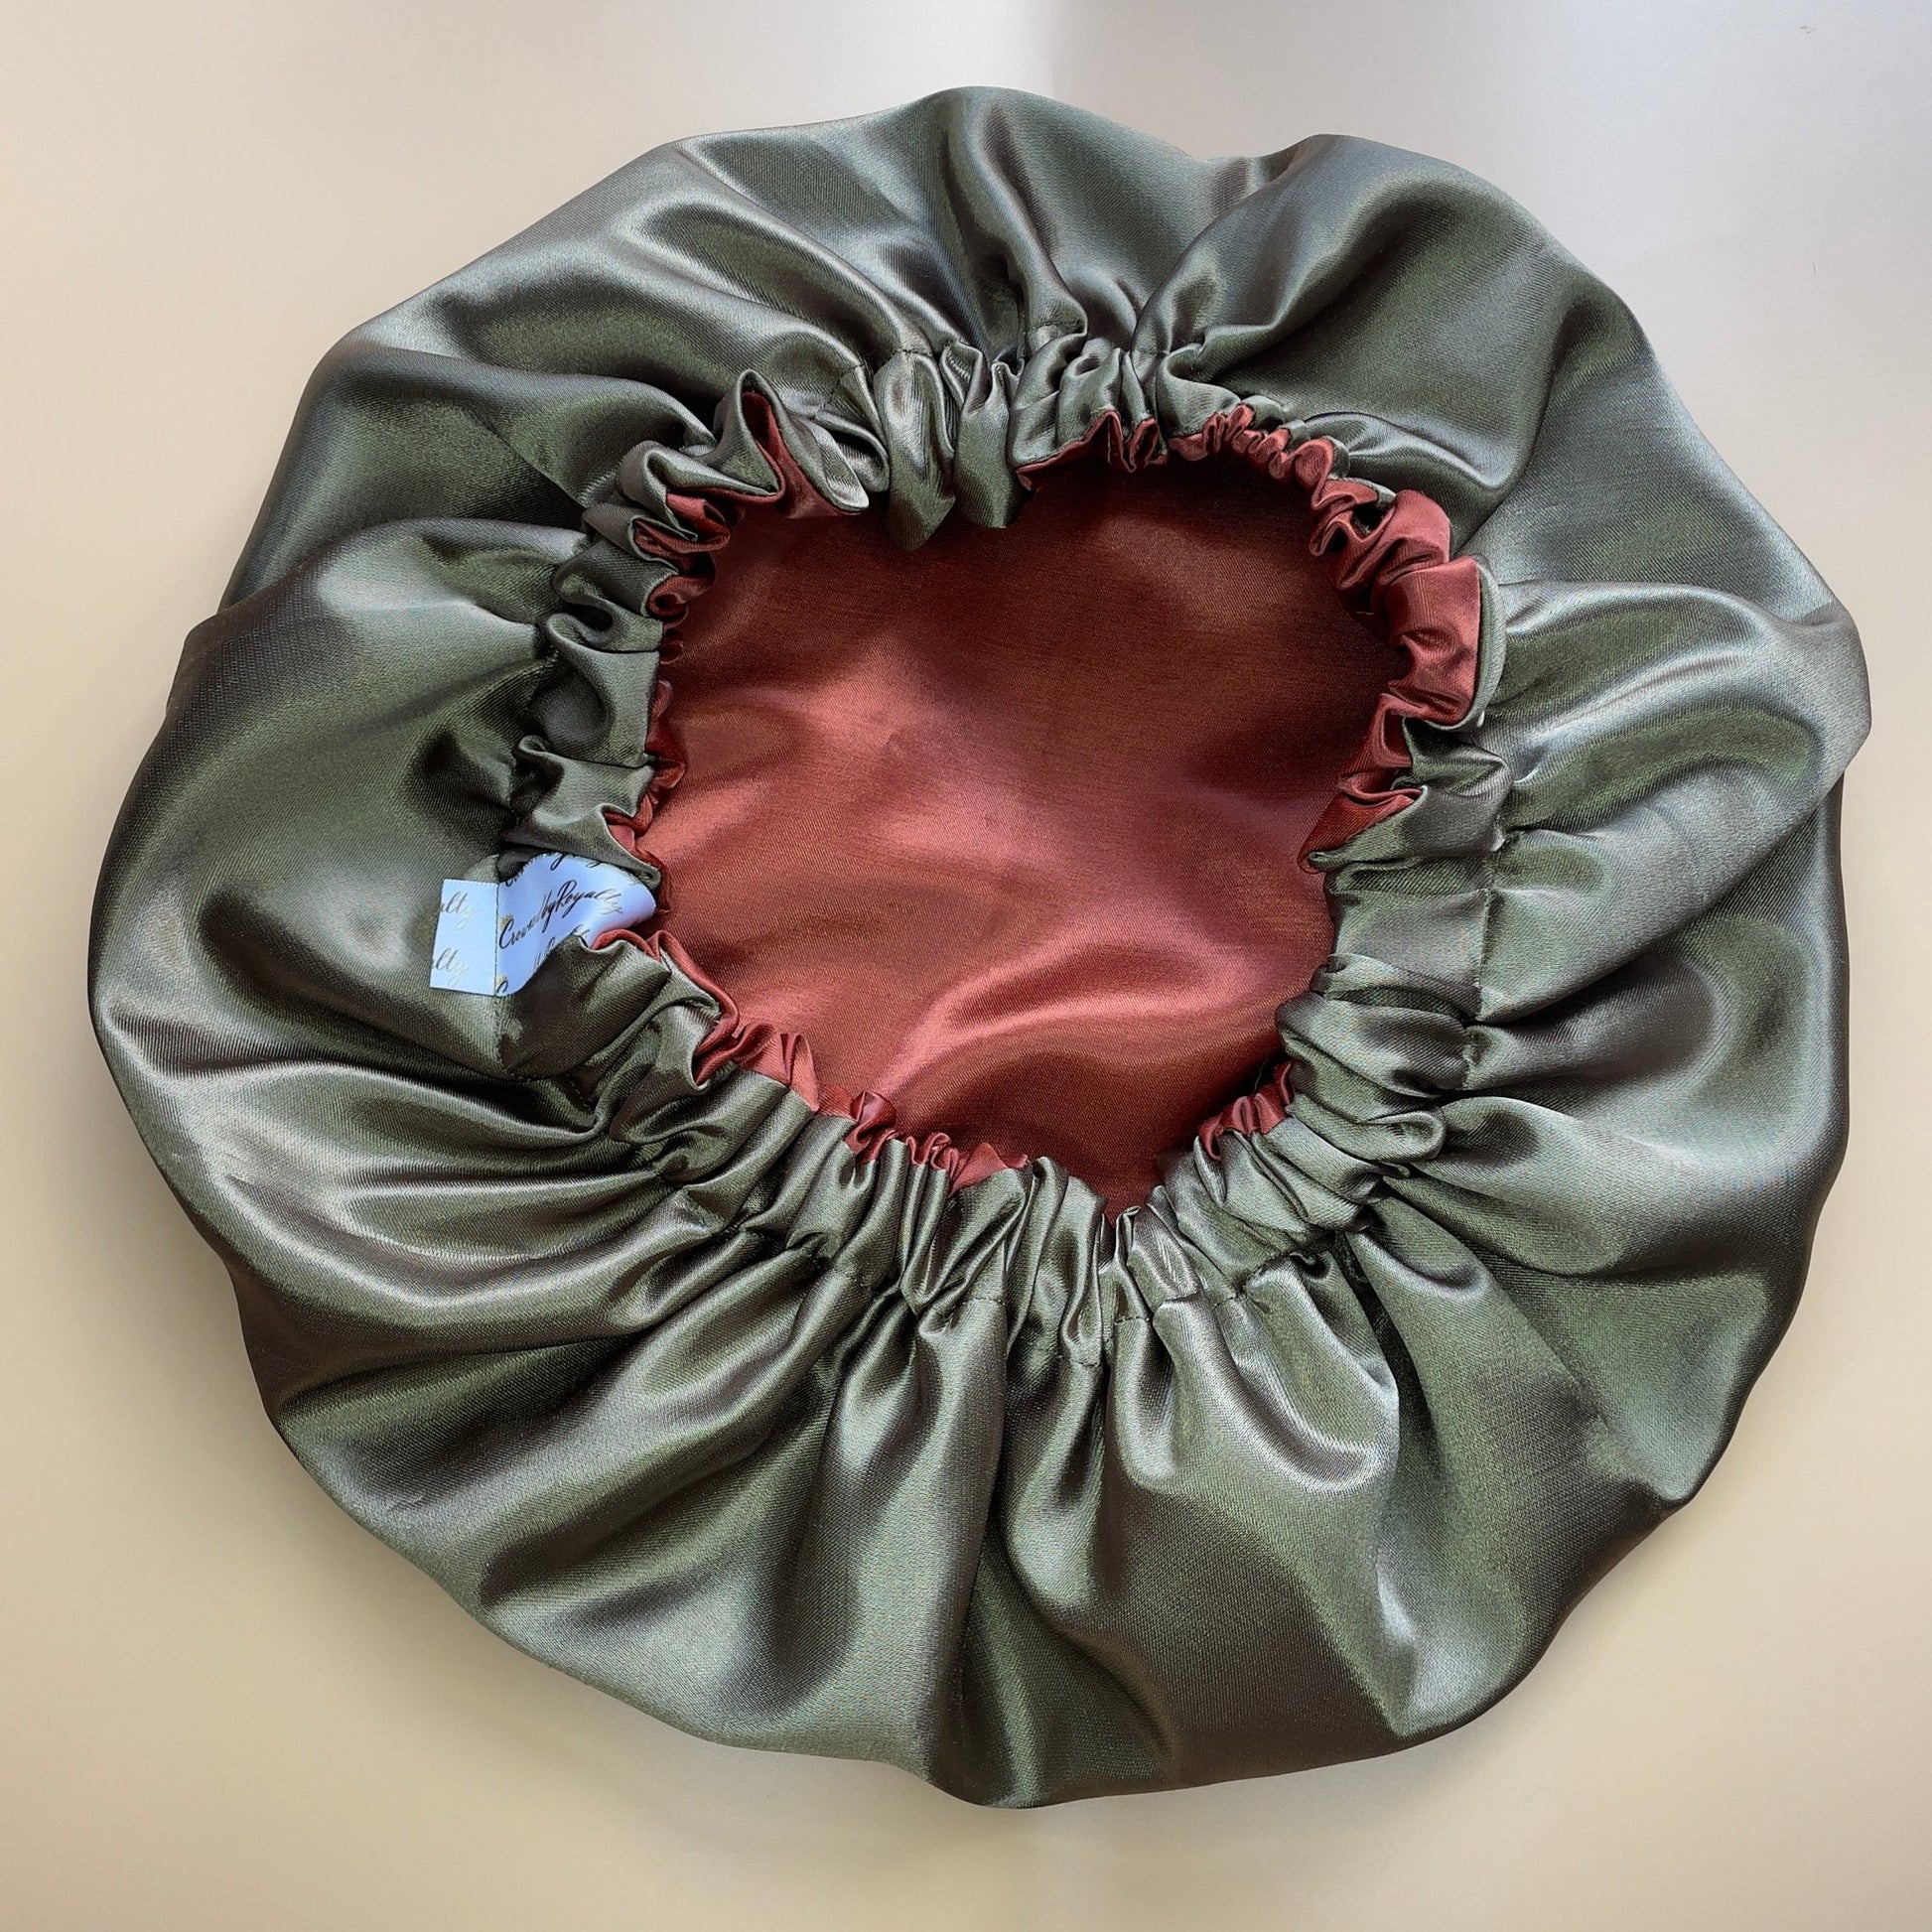 Copper - Reversible Satin Bonnet - Crowned by RoyaltyOlive